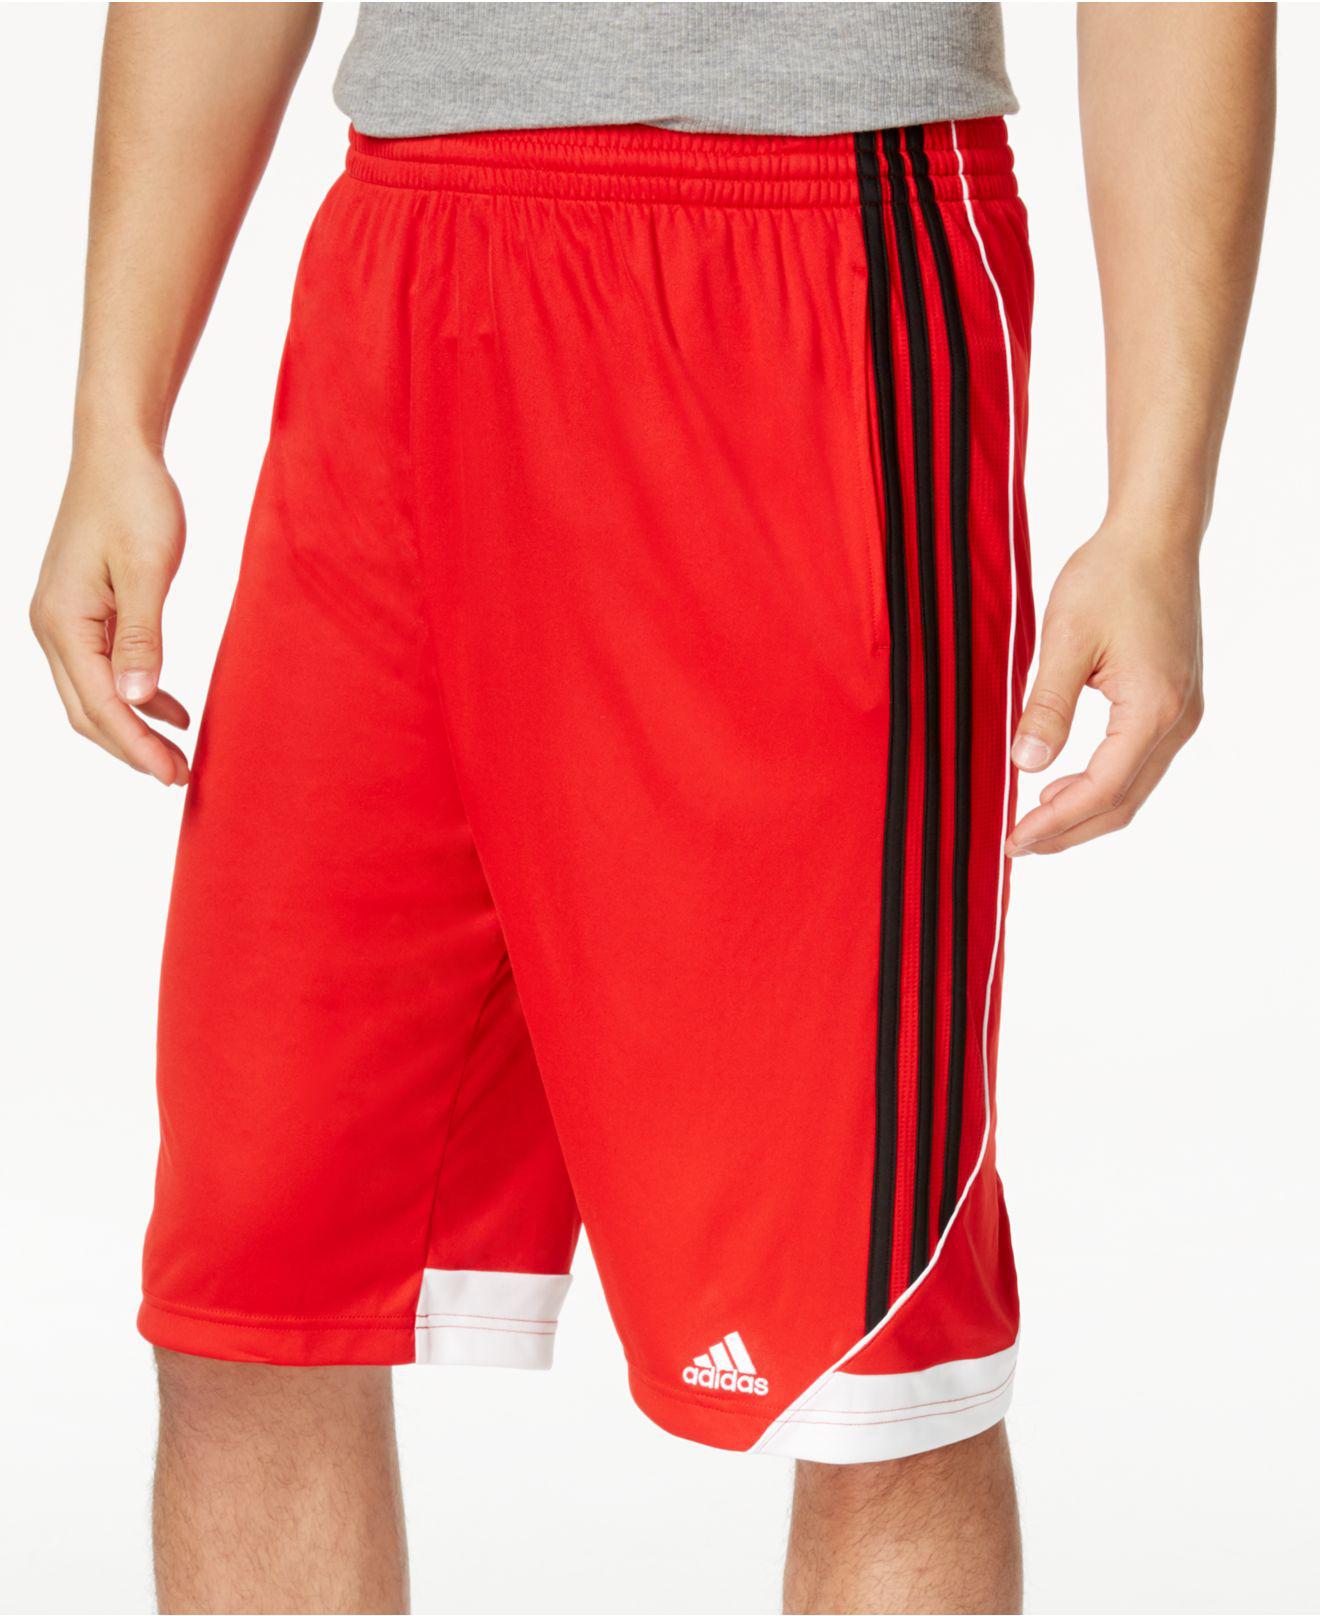 Lyst - Adidas Men's 3g Speed 2.0 Basketball Shorts in Red for Men